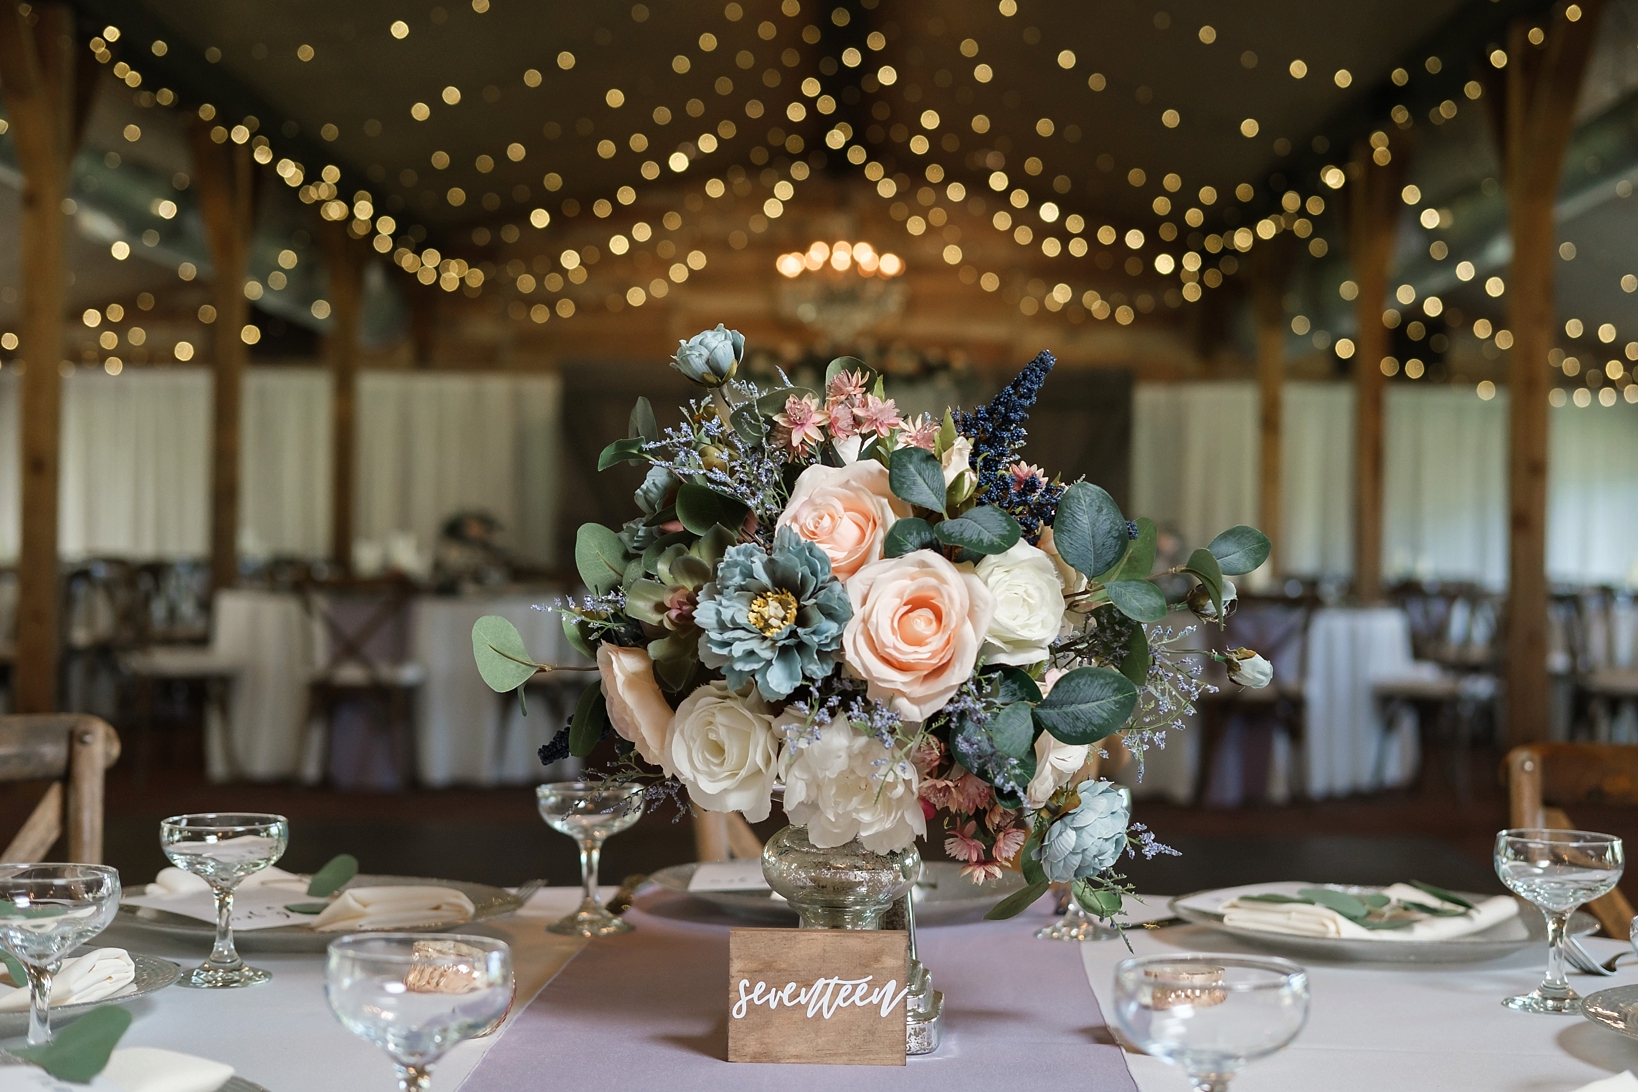 A large floral arrangement and table number under the string lights of the wedding reception